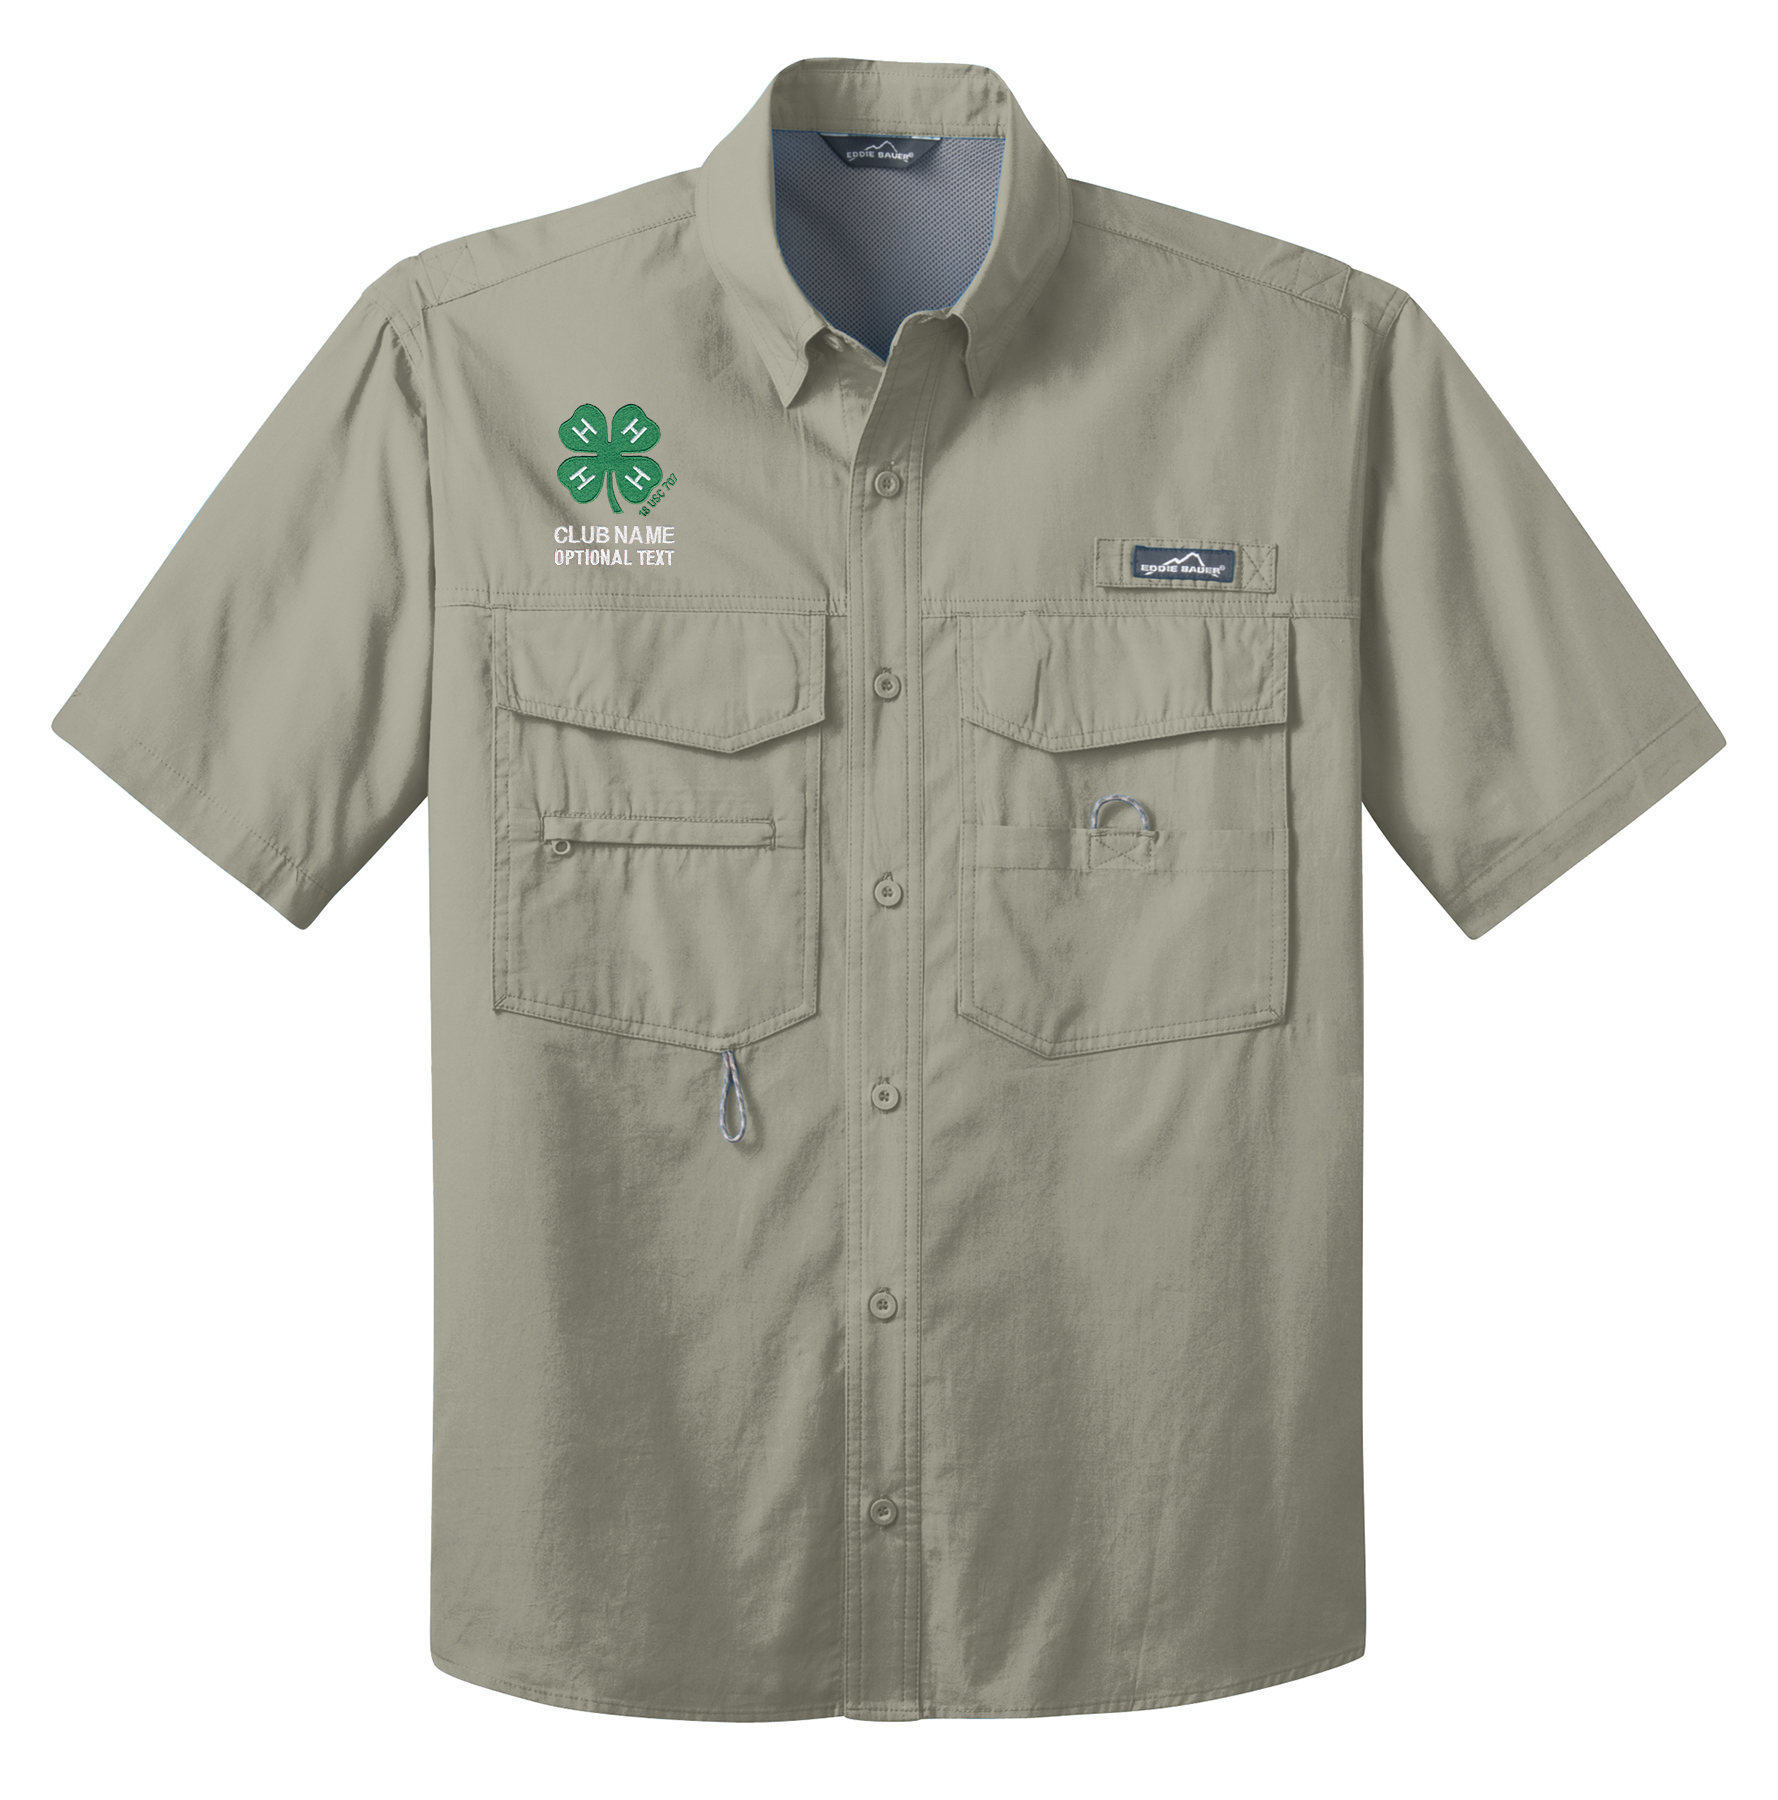 Eddie Bauer – Short Sleeve Fishing Shirt with Embroidered 4-H Logo - Drift Wood, 2x Large